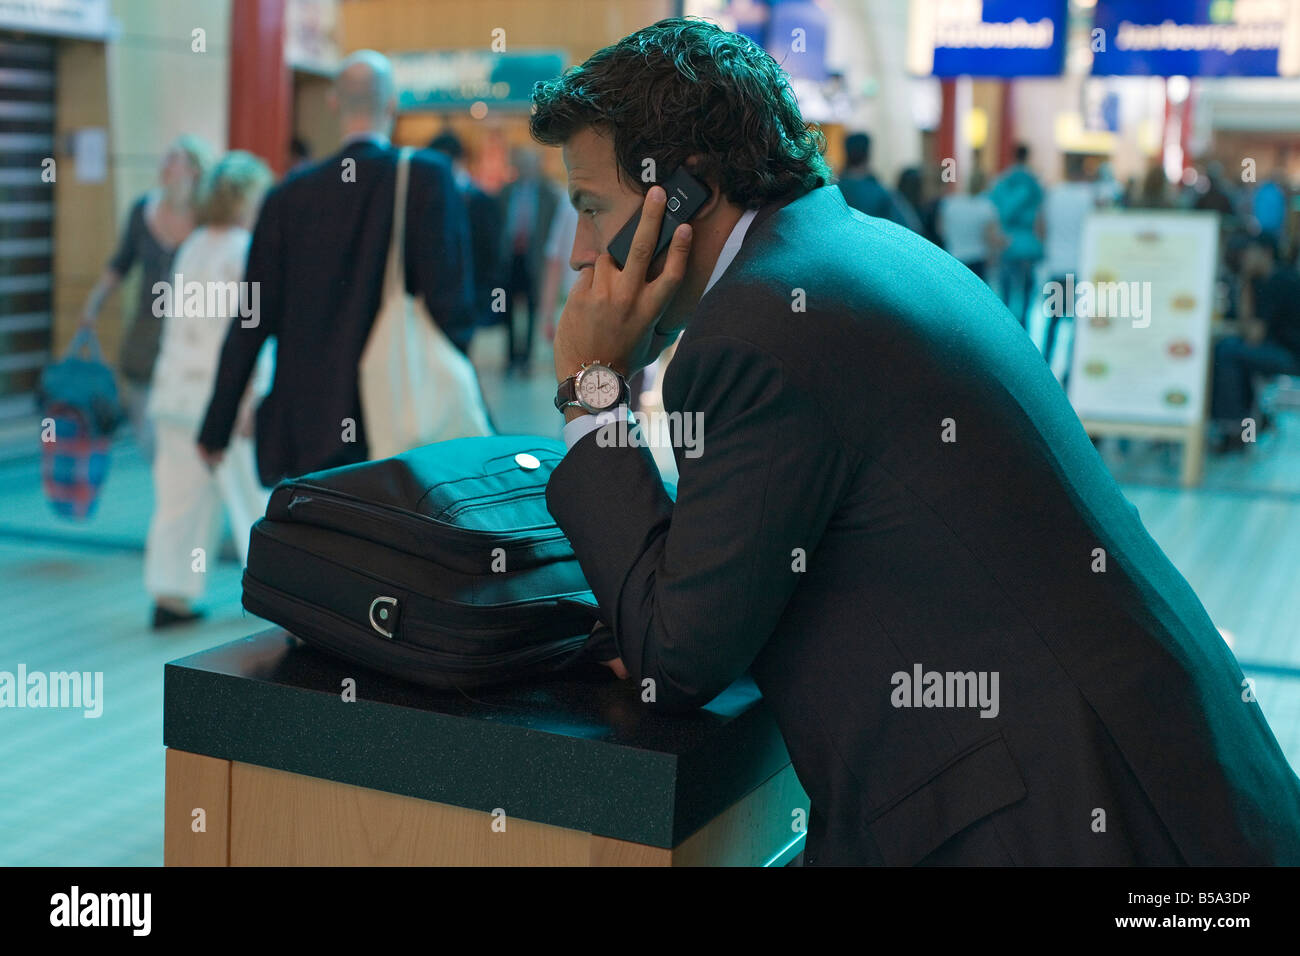 Young Business man making a telephone call. Stock Photo